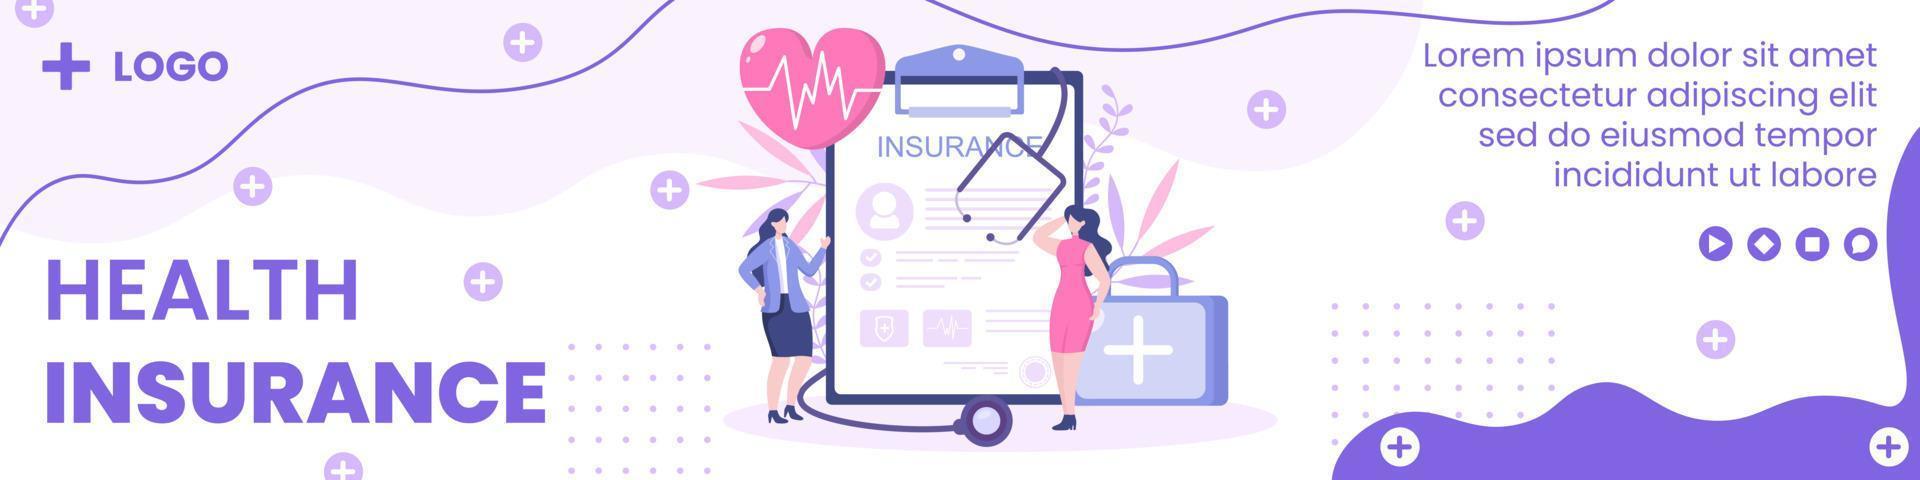 Health care Insurance Banner Template Flat Design Illustration Editable of Square Background for Social media, Greeting Card or Web Internet vector